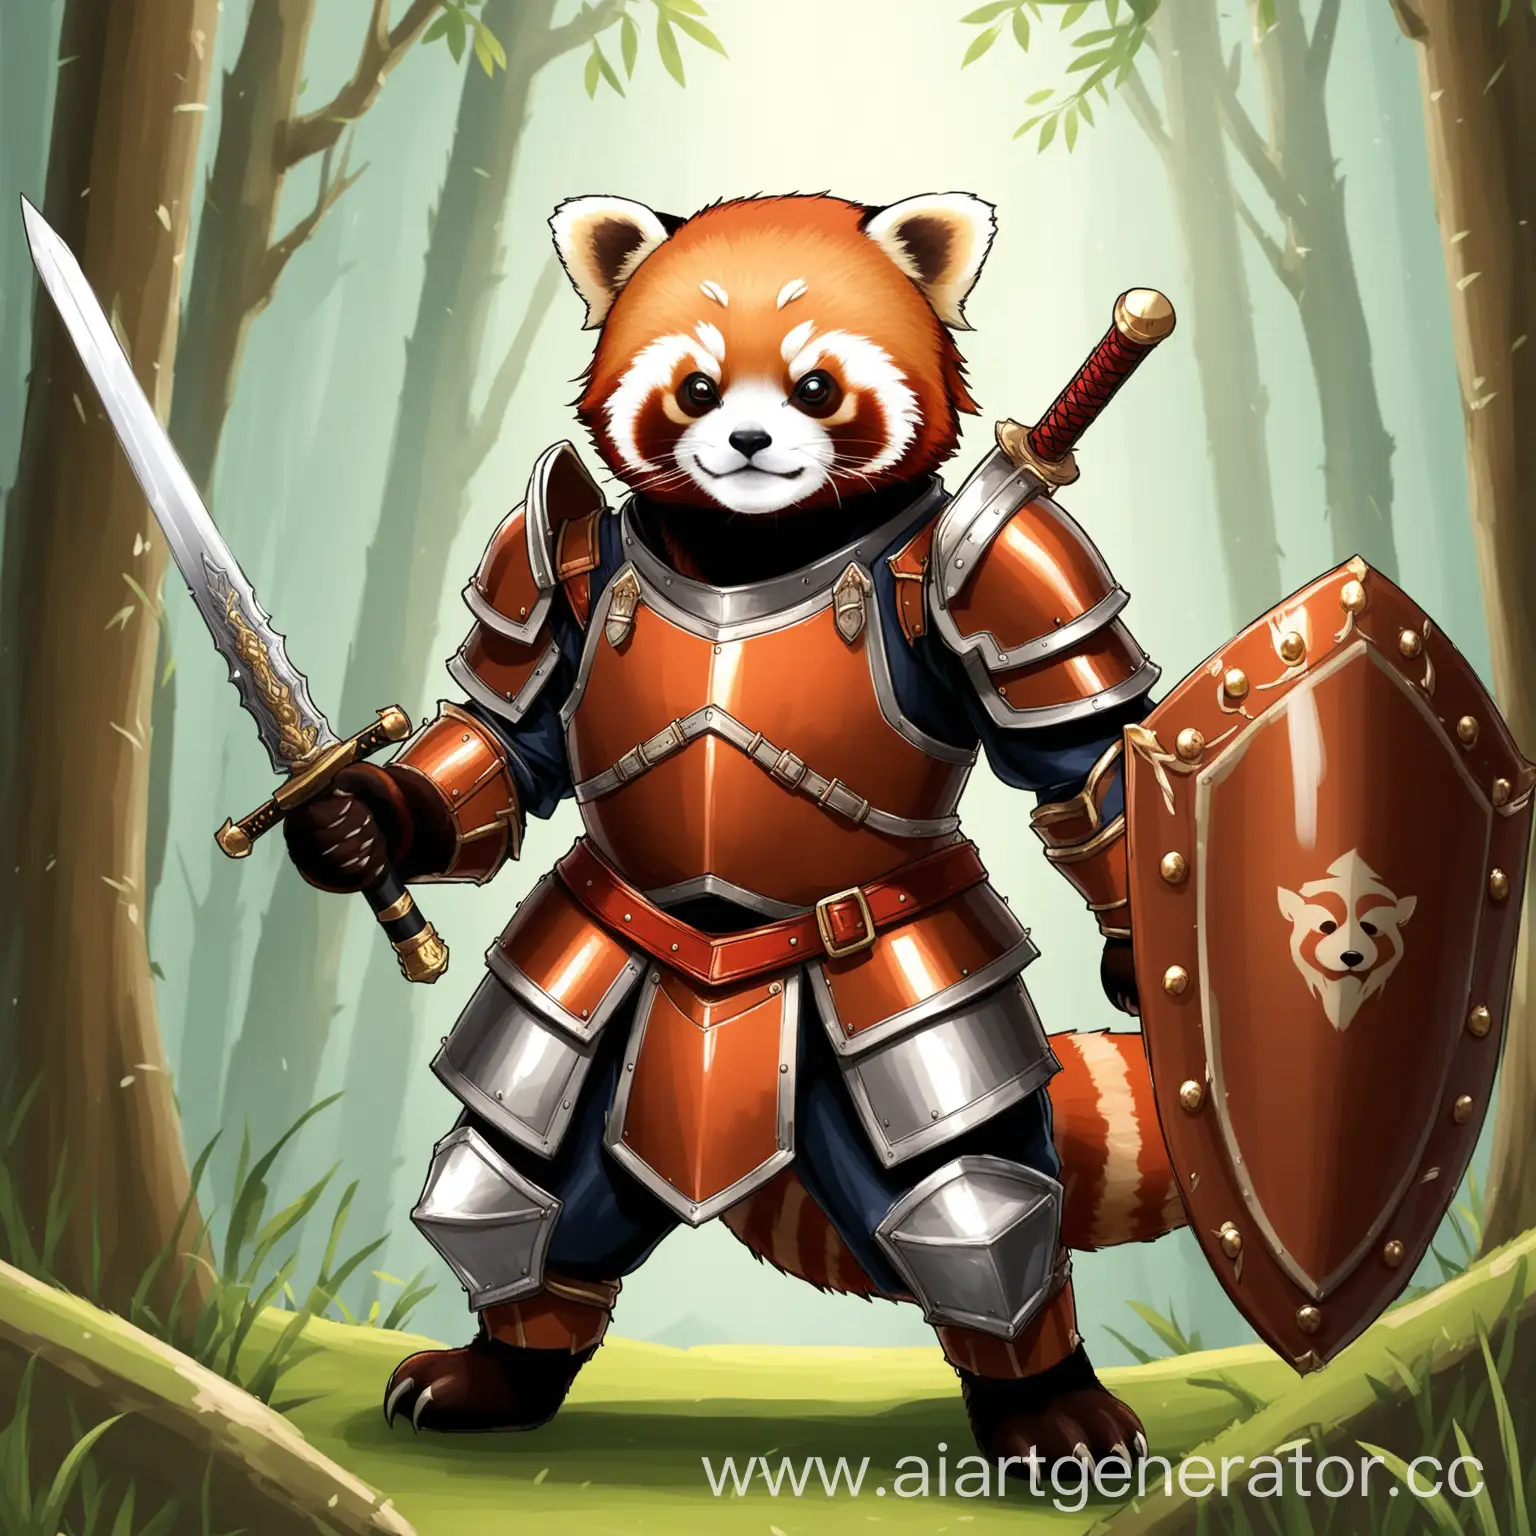 Red-Panda-Warrior-in-Armor-with-Sword-and-Shield